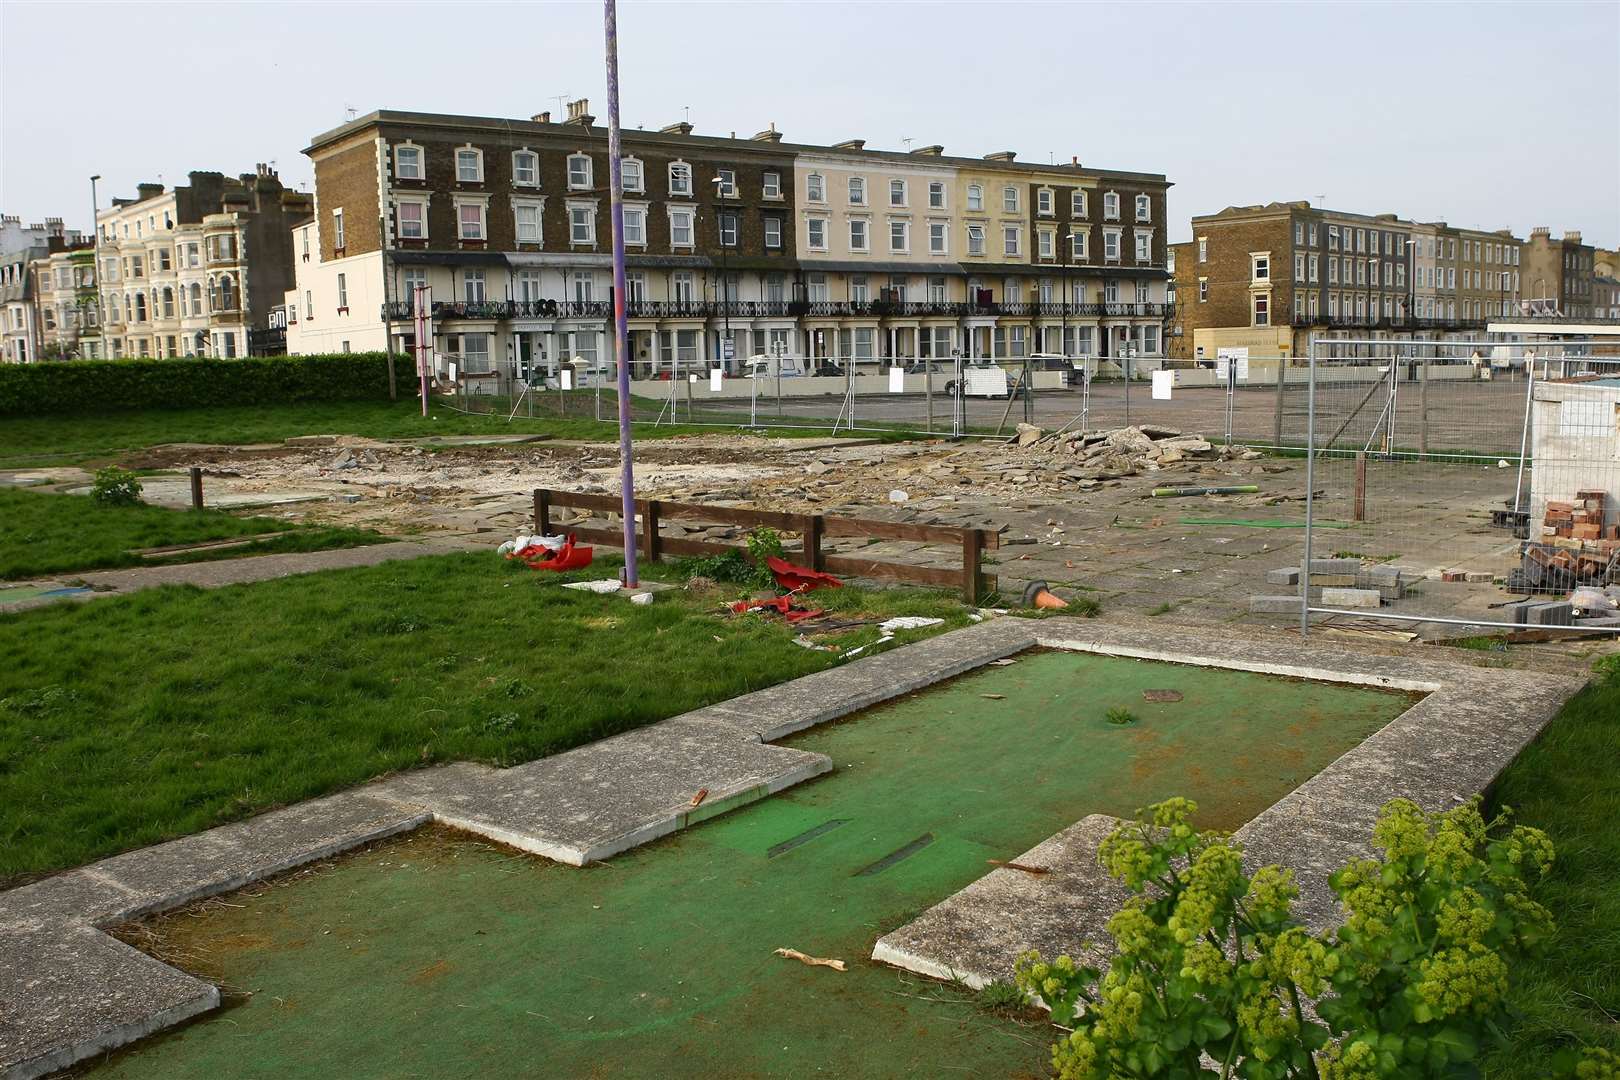 The former skate park after it was demolished, pictured here in 2014. Picture: Matt Bristow